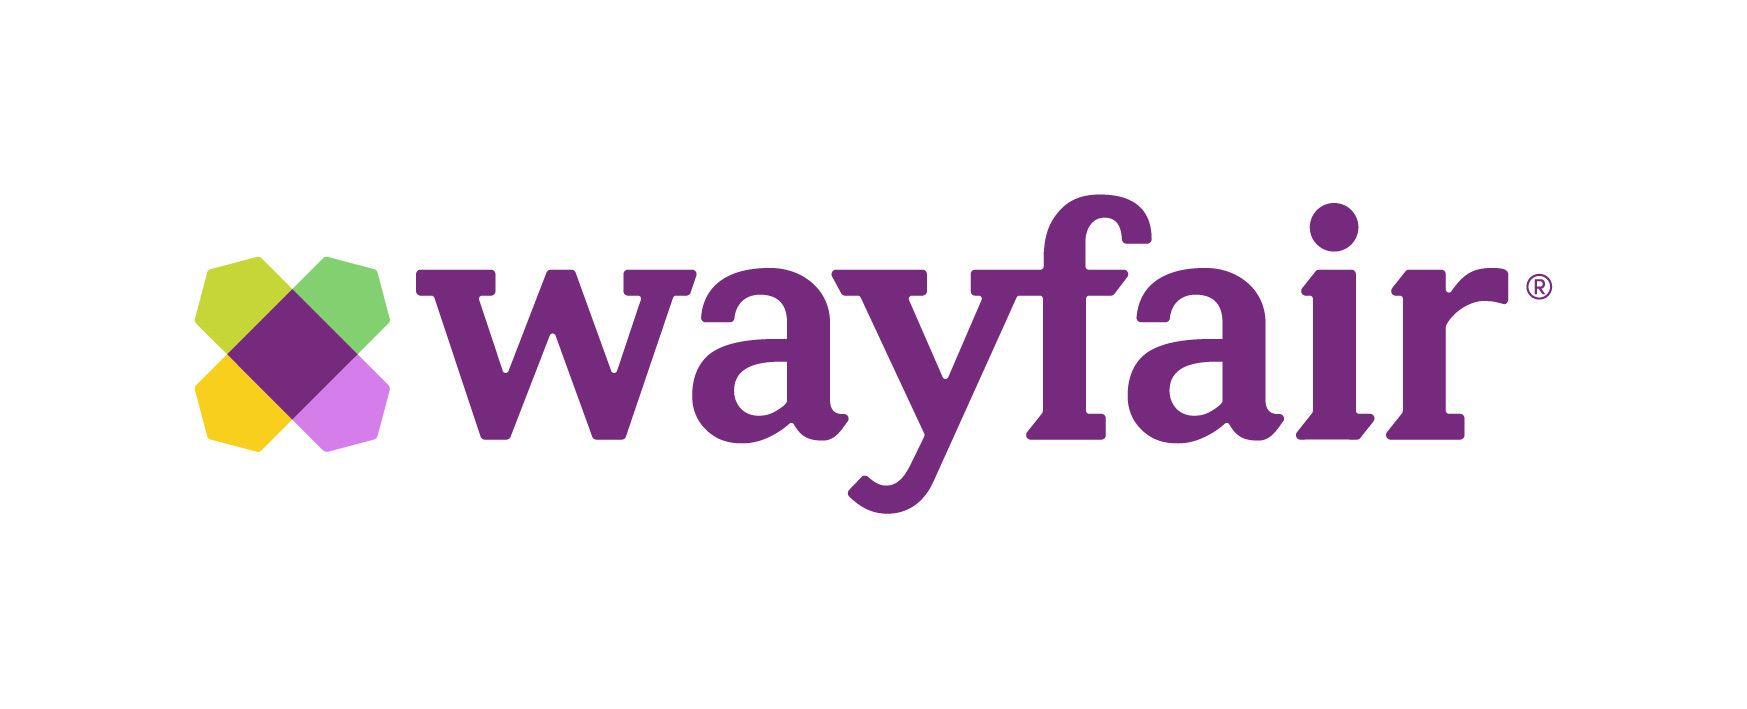 Chewy.com Logo - The Fly Blog. Analyst Sees Wayfair As Takeover Target After Chewy